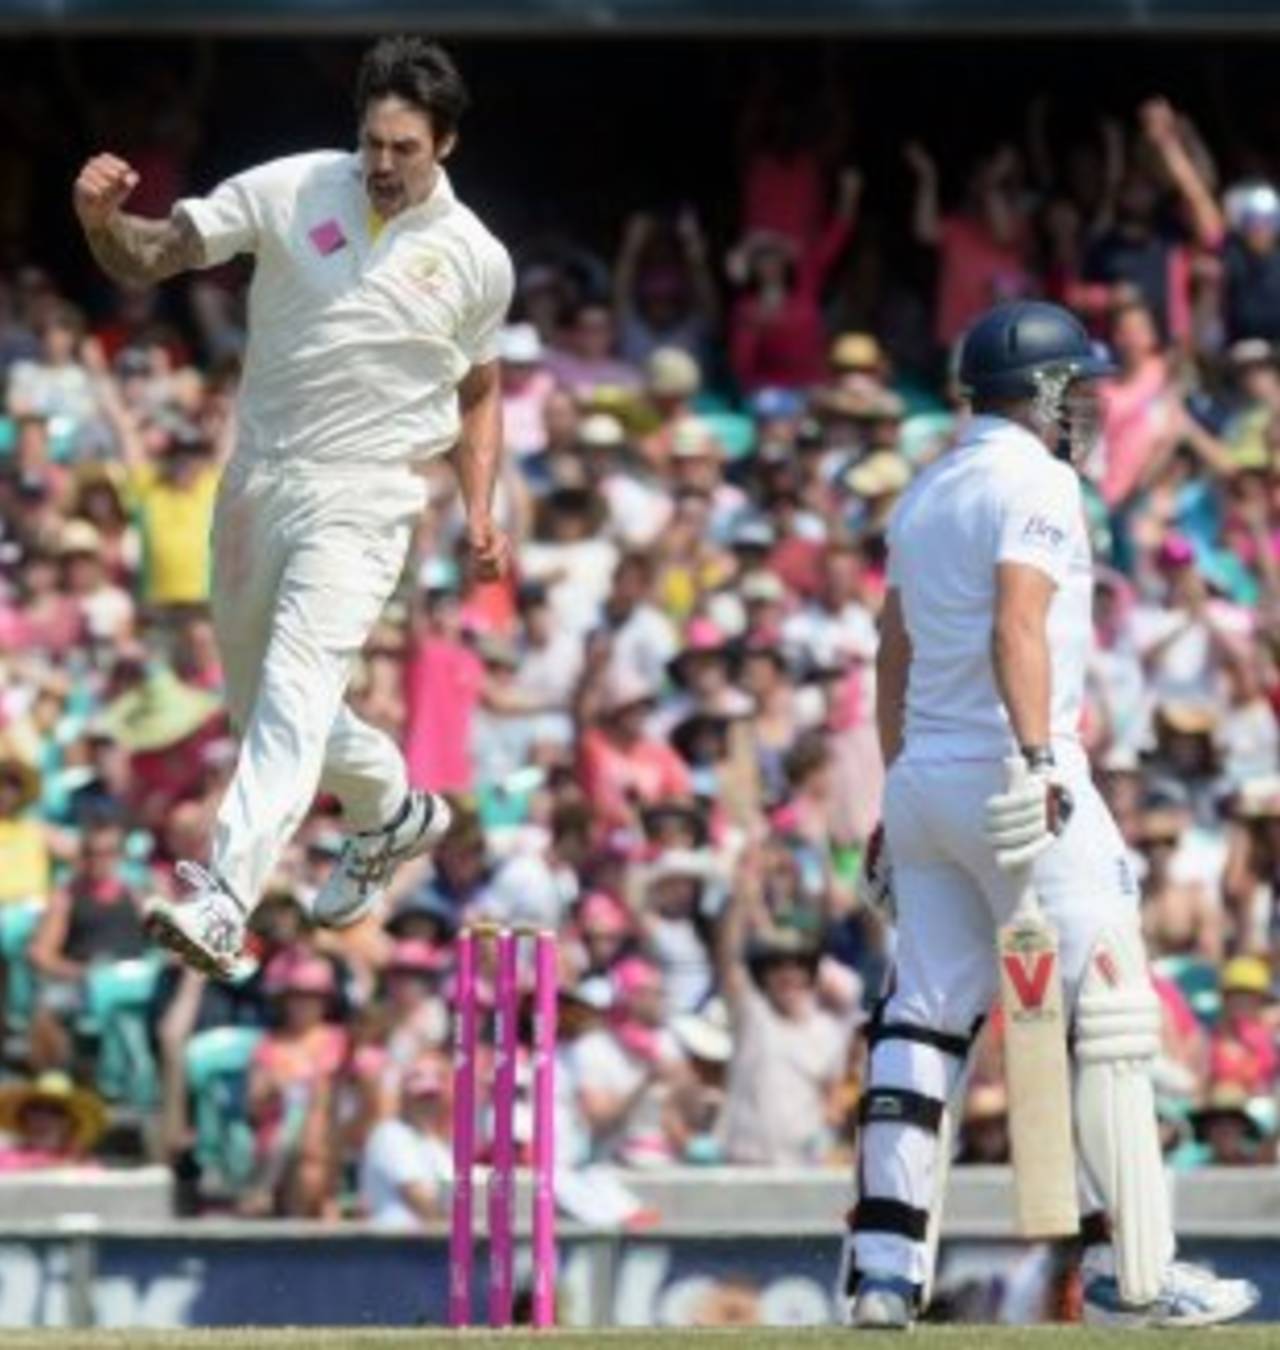 The familiar leap from Mitchell Johnson as he bags another wicket, Australia v England, 5th Test, Sydney, 3rd day, January 5, 2014